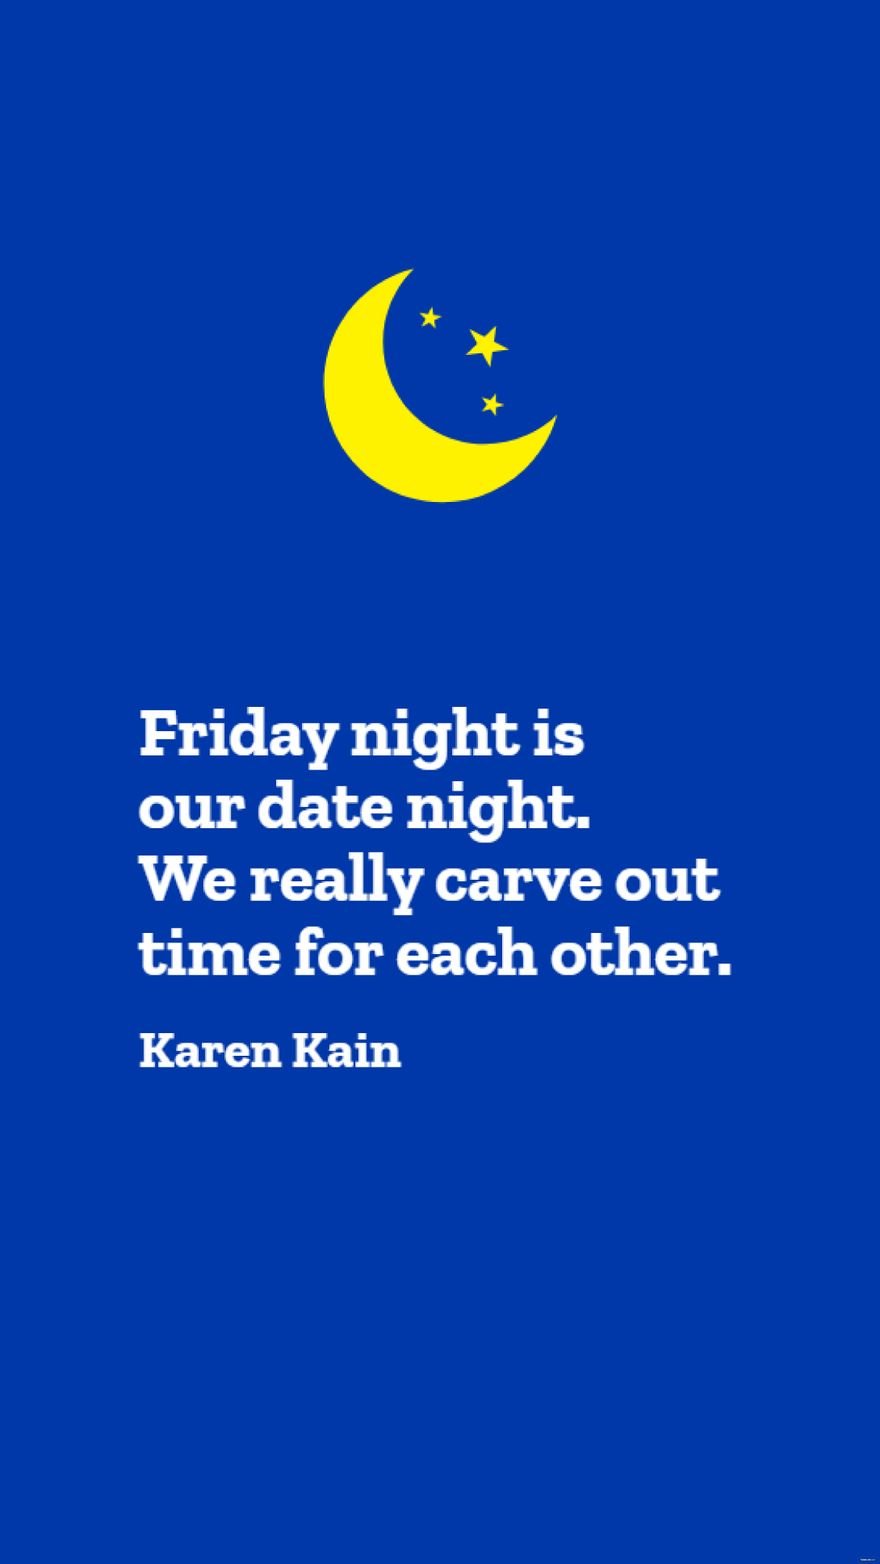 Karen Kain - Friday night is our date night. We really carve out time for each other. 